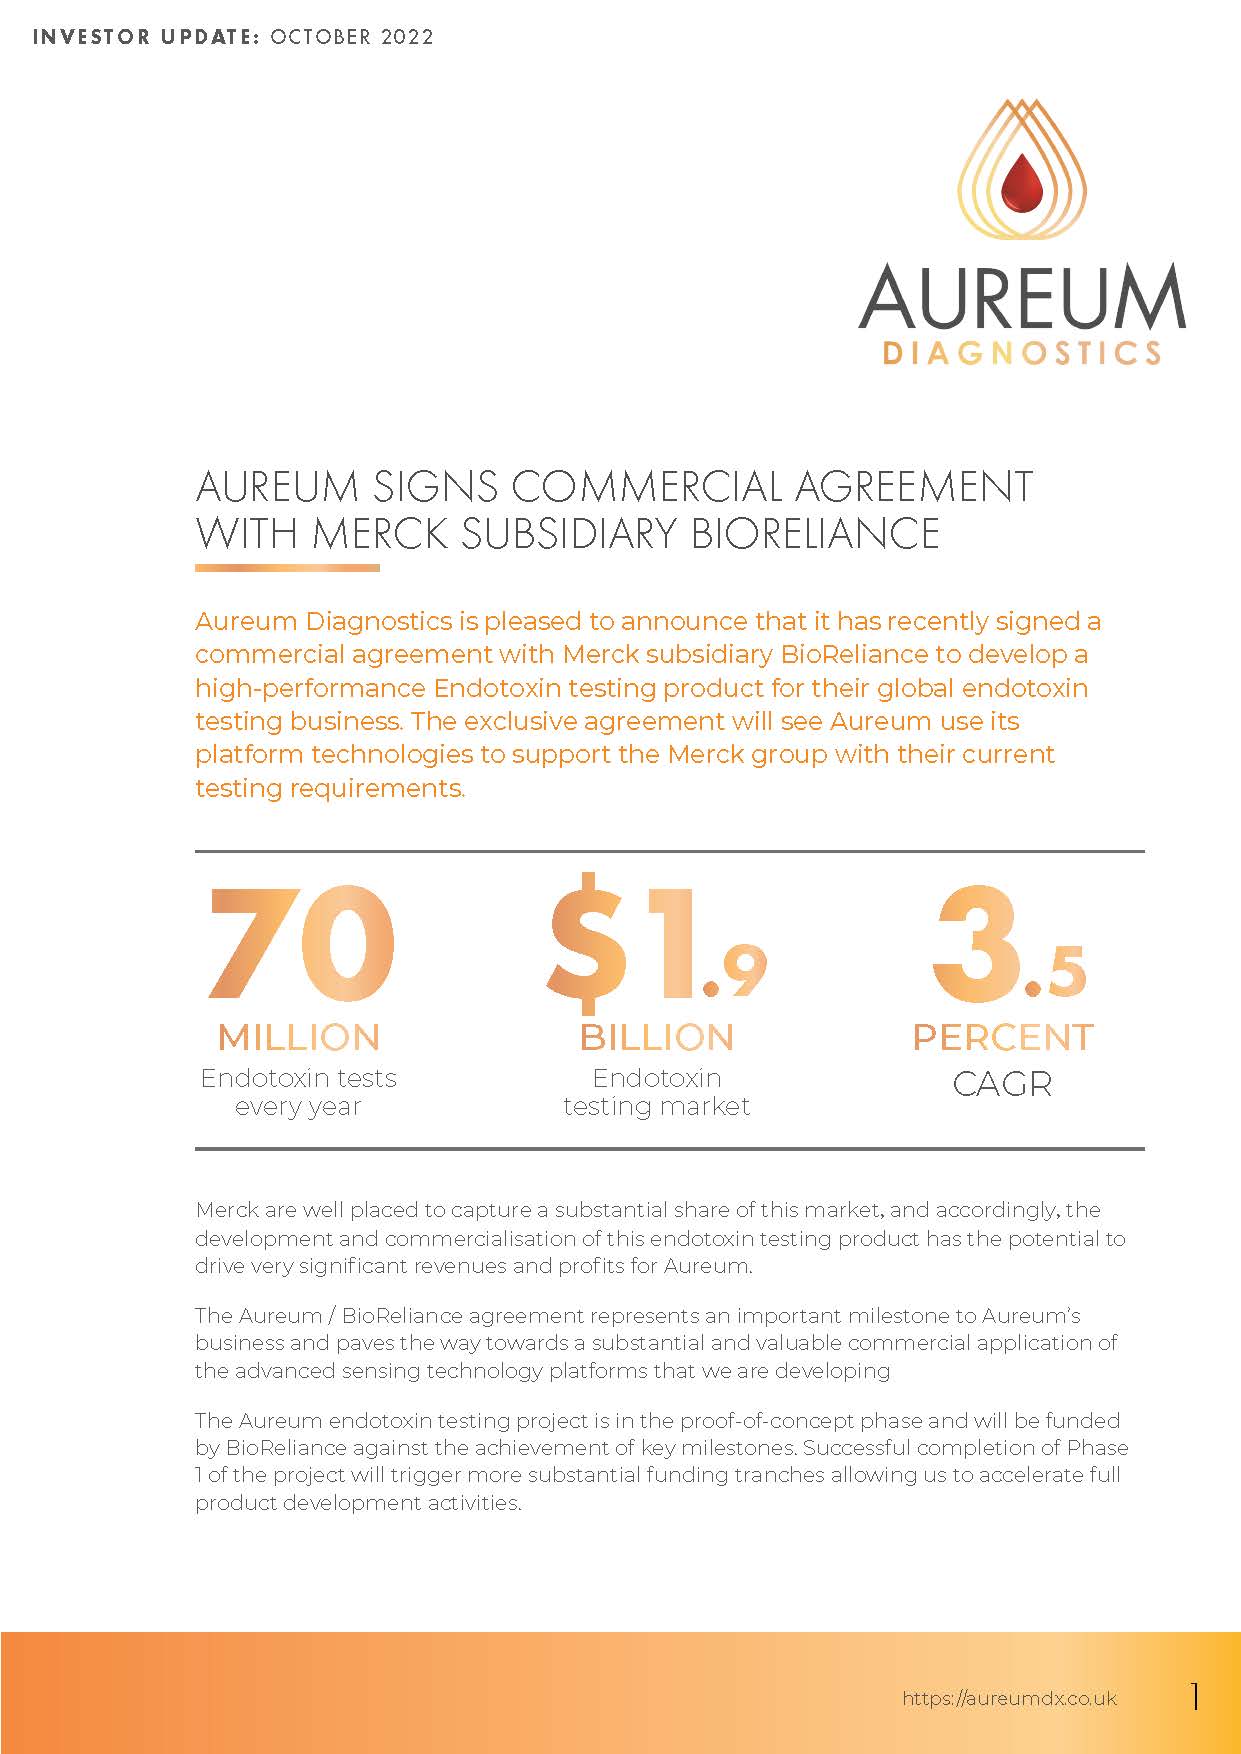 Aureum signs commercial agreement with BioReliance